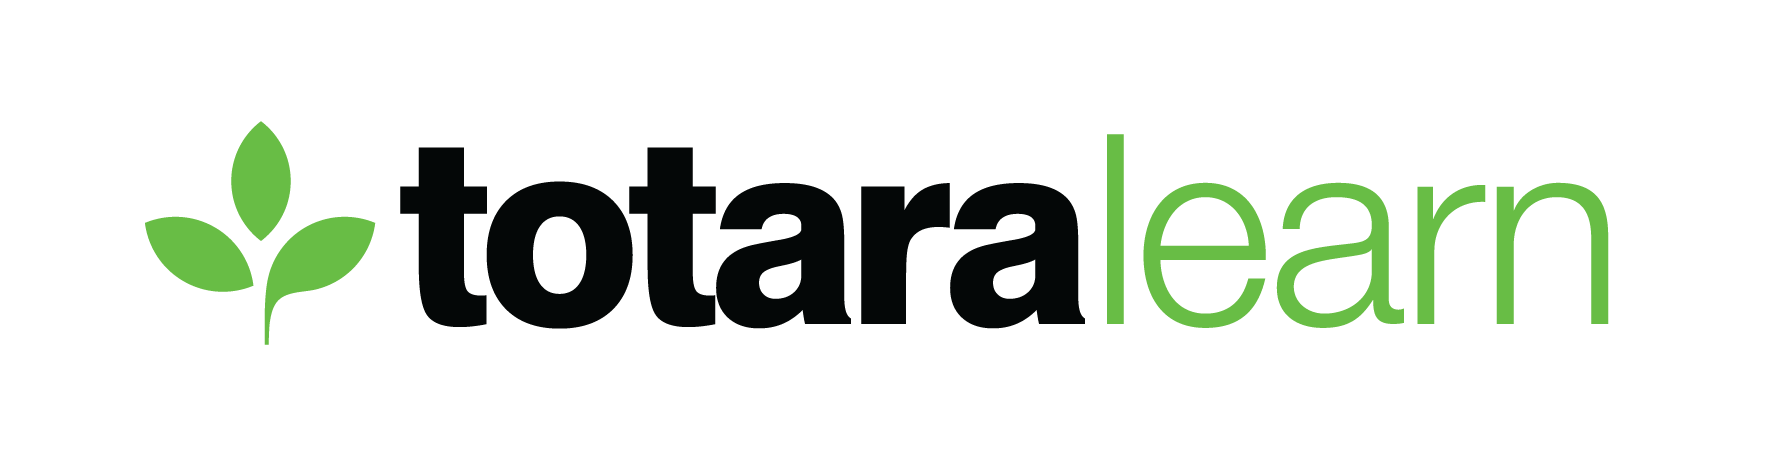 Totara Learning Management Systems (LMS)